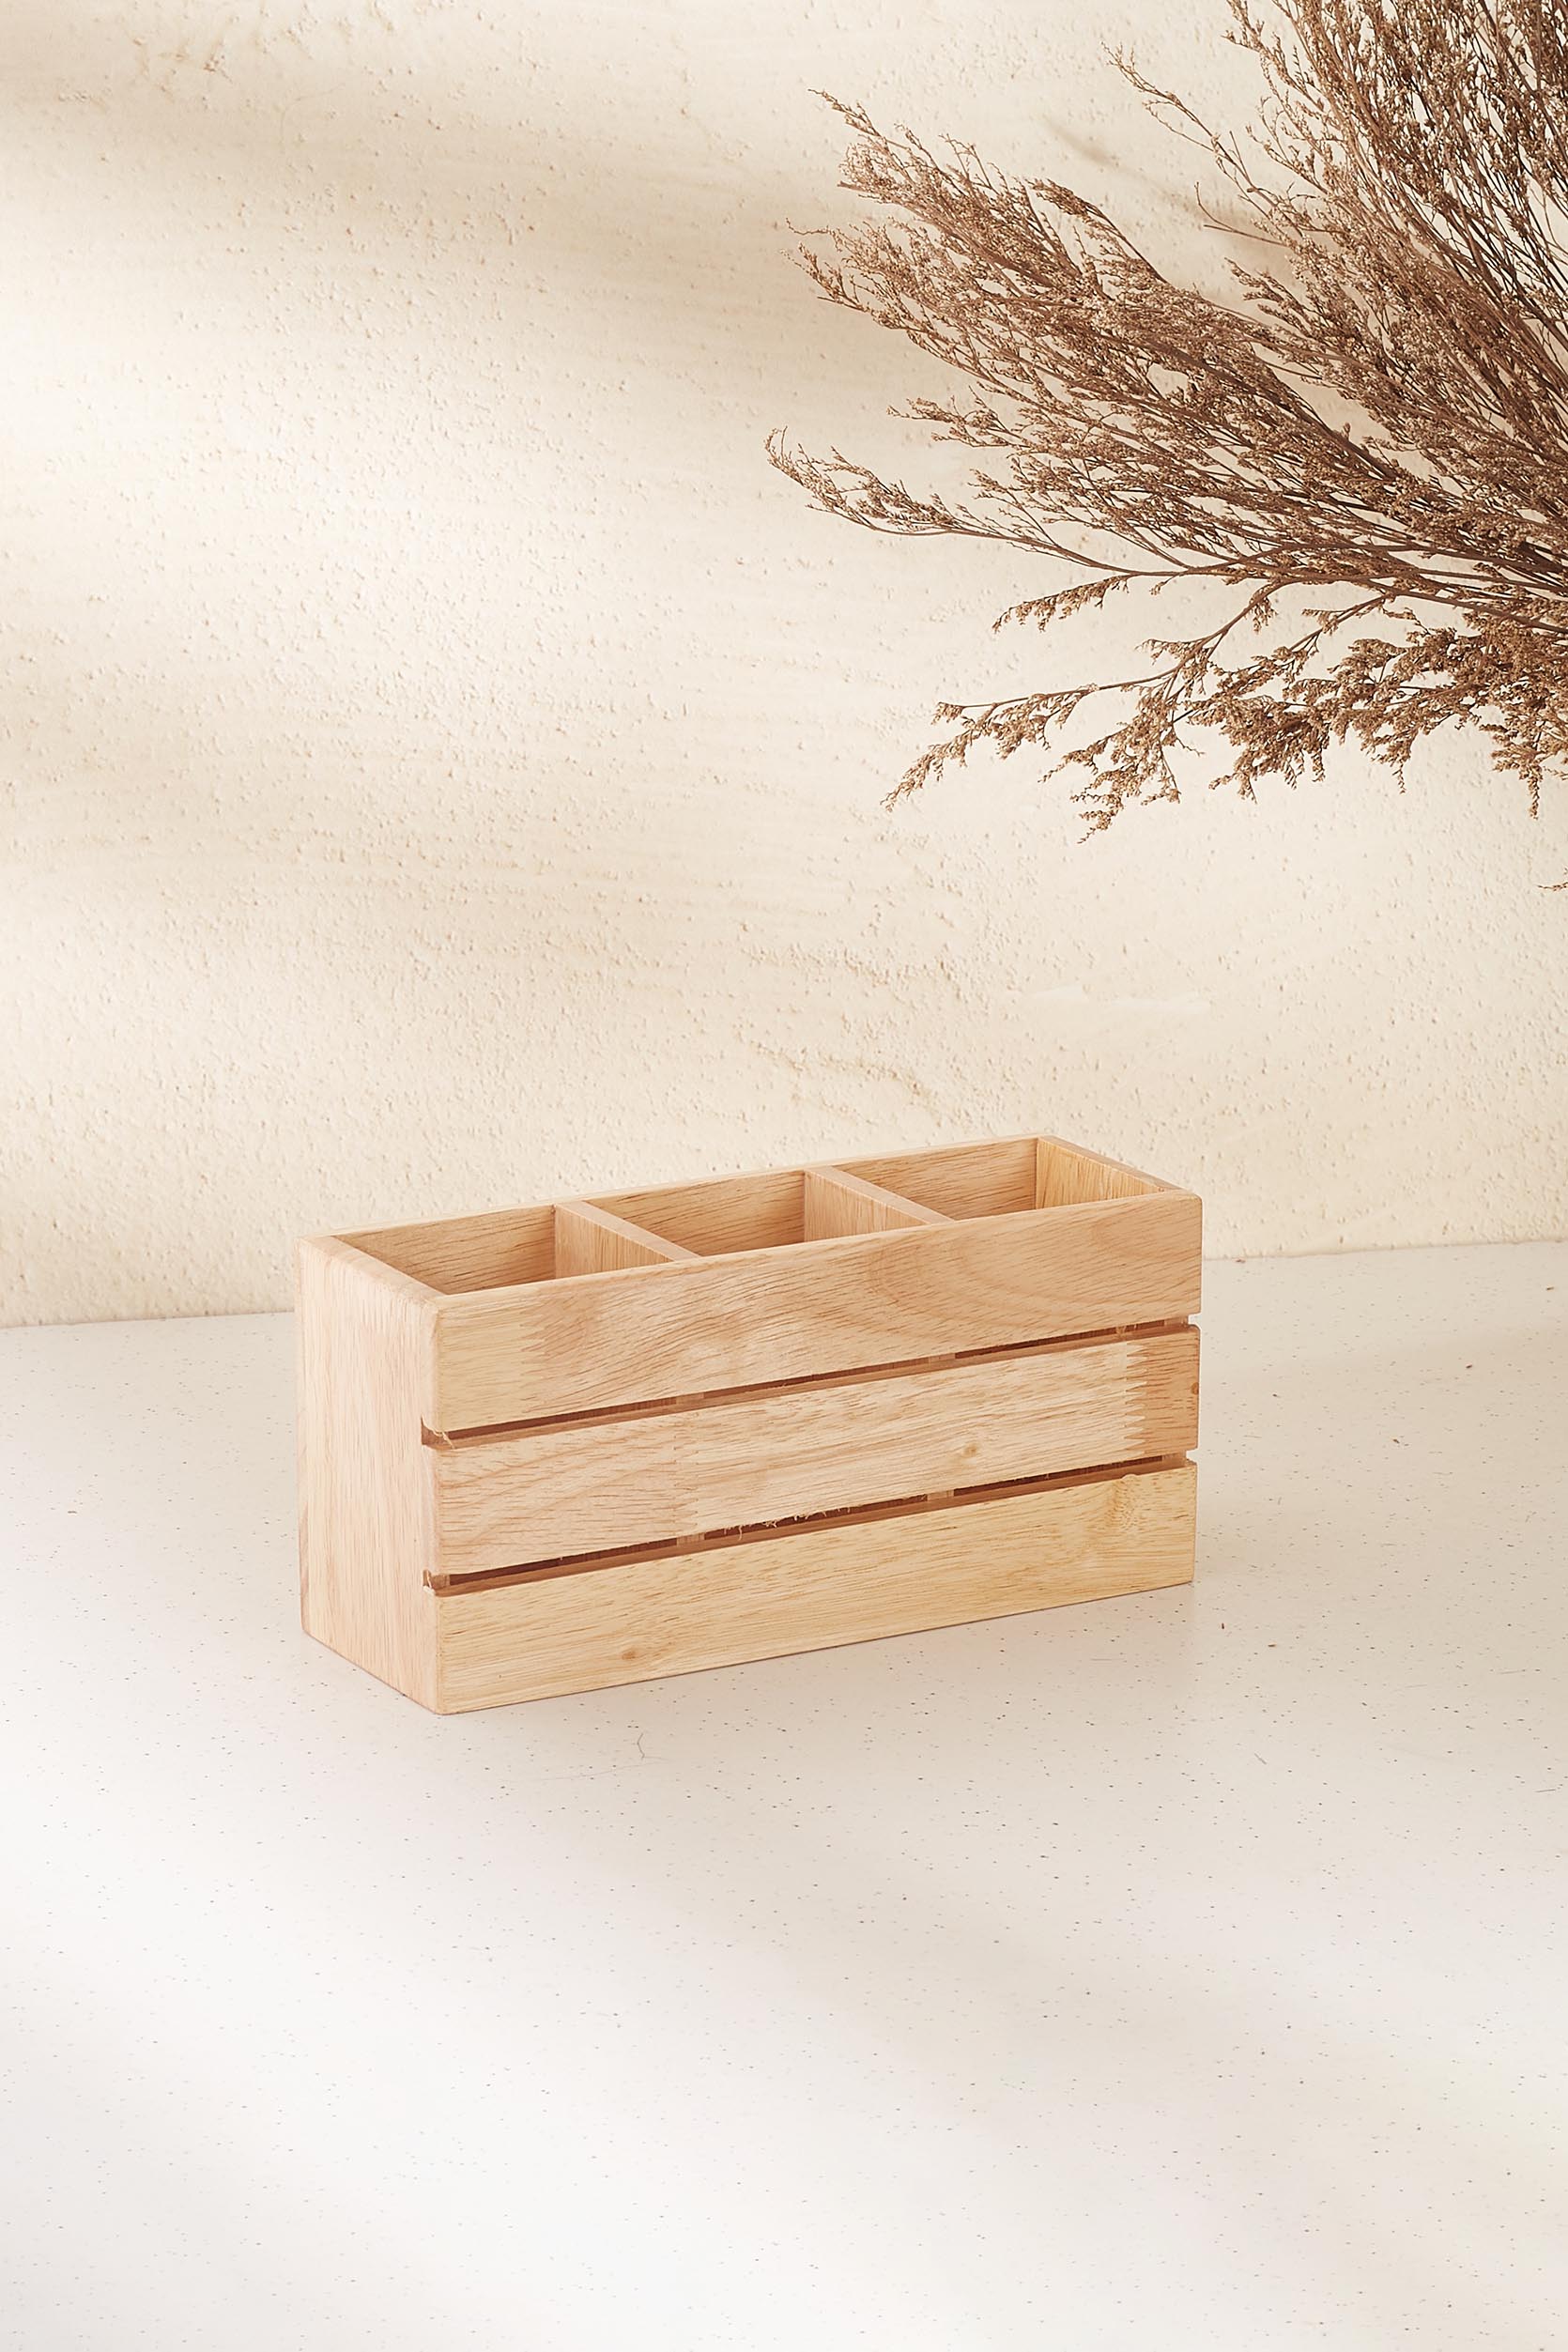 Natural Wood Cutlery Holder